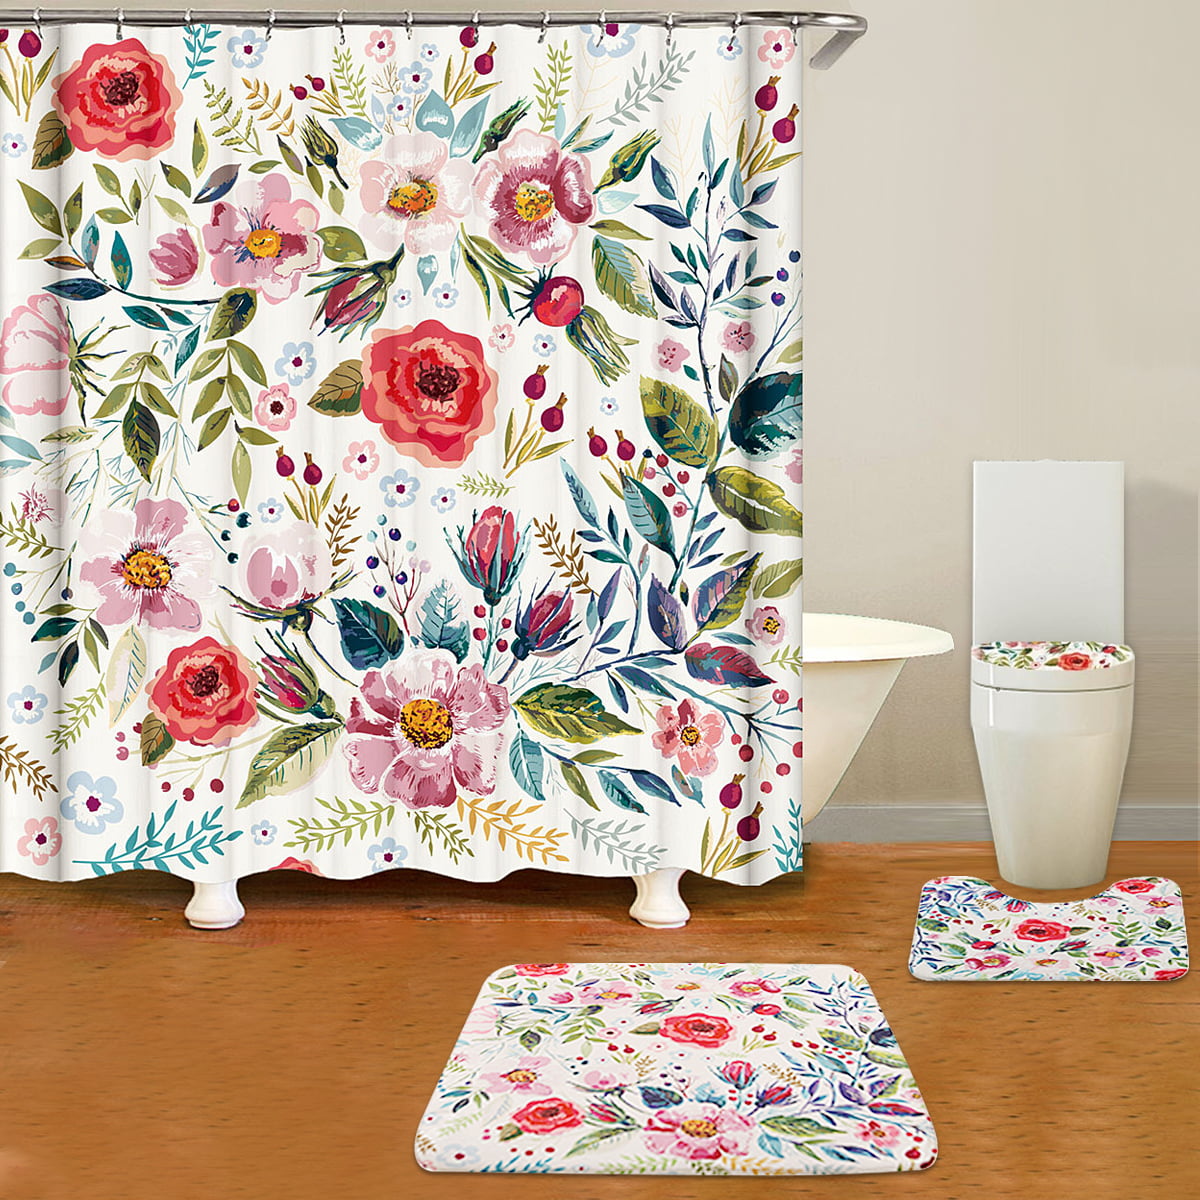 Toilet Lid Cover, 4 Piece Colorful Flower Shower Curtain Set with Non-Slip Rug 